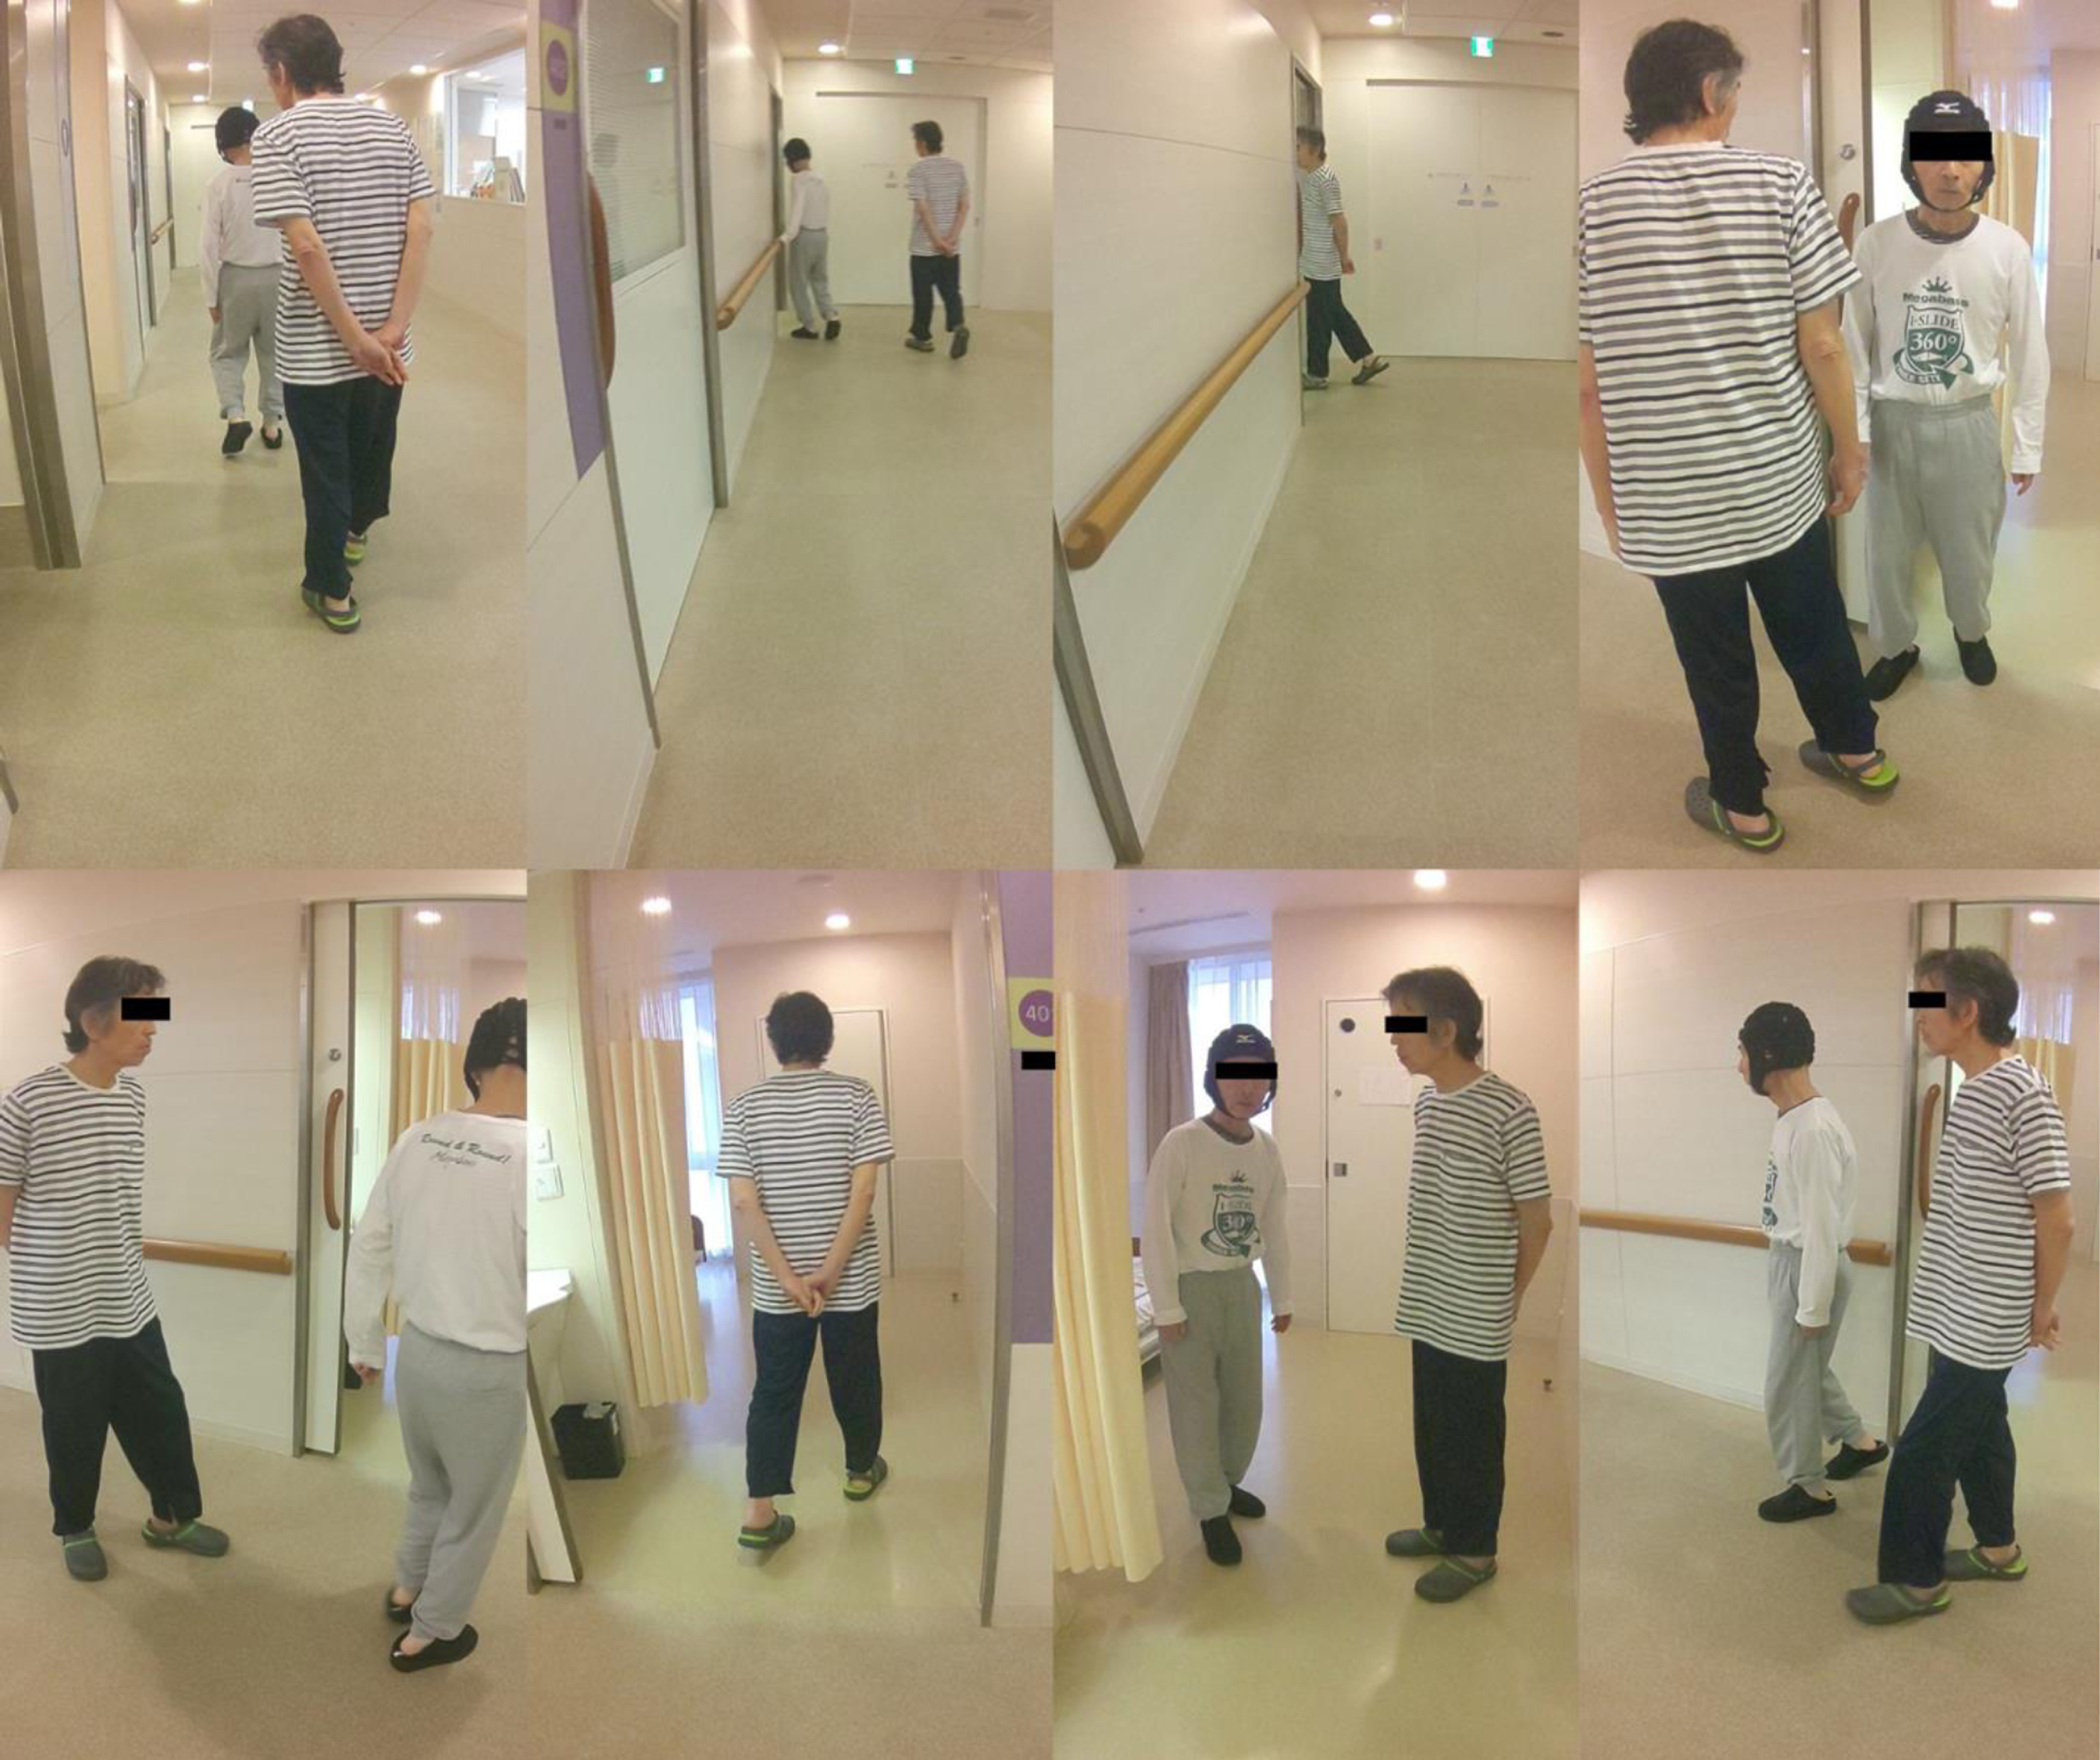 Shadowing behavior. The patient wearing a striped shirt shows shadowing behavior. He follows another patient into that room. When another patient leaves the room, he follows him out of the room again.